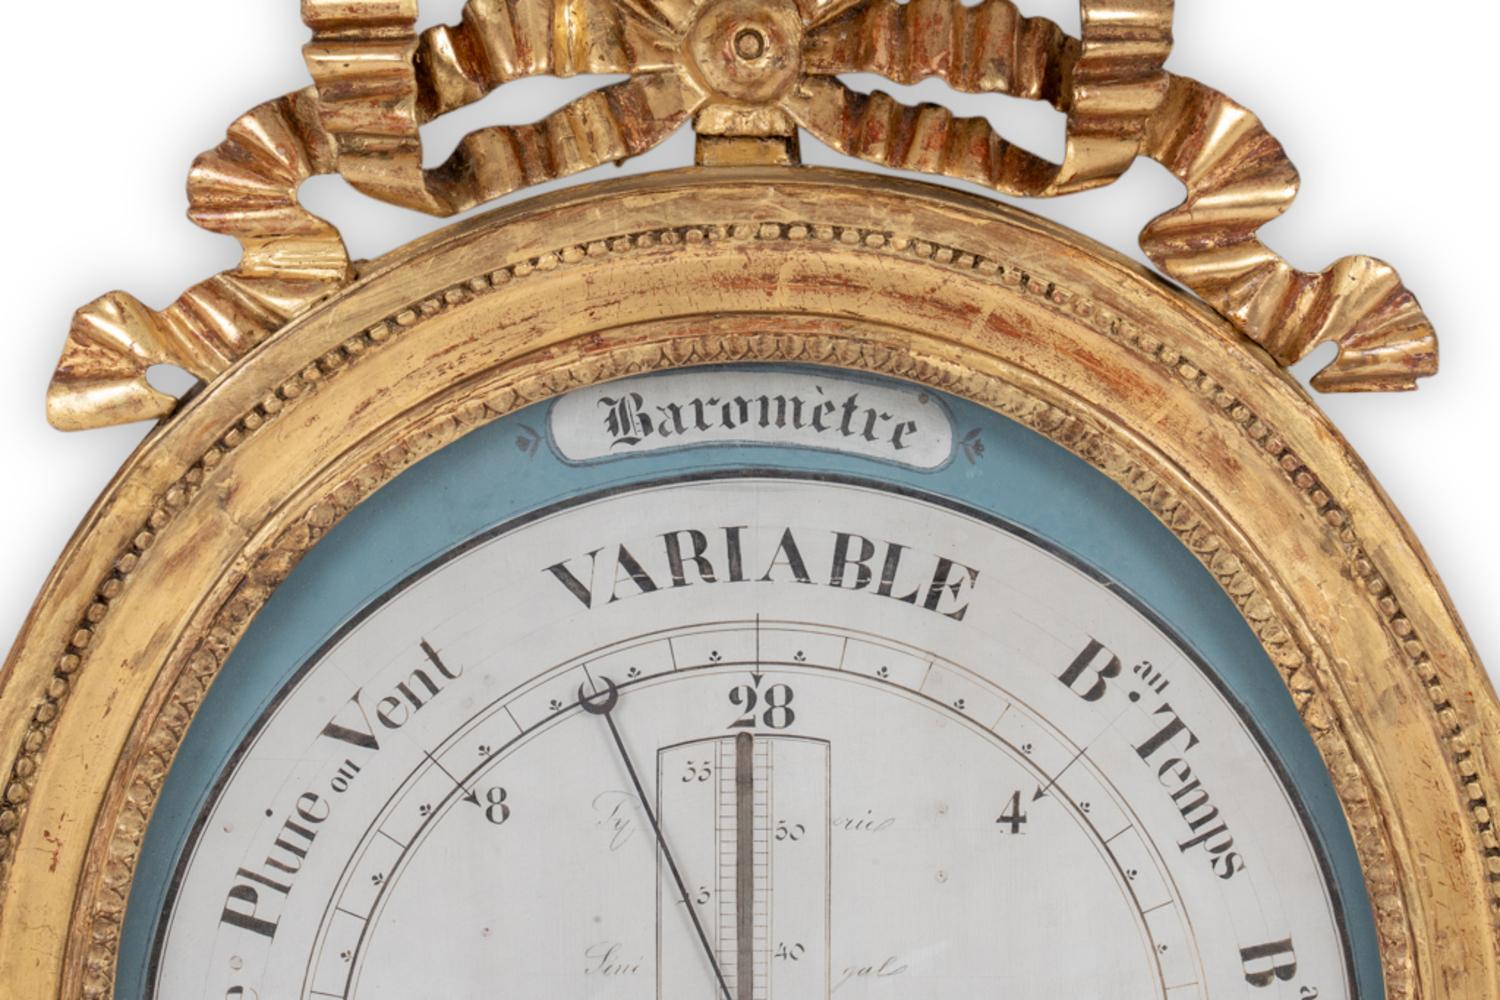 Louis XVI barometer in gilded wood in the shape of a medallion, with a double row of finely beaded decoration. It is topped with a pediment decorated with a knot-shaped garland. The metal hand indicates time variations on a white and blue